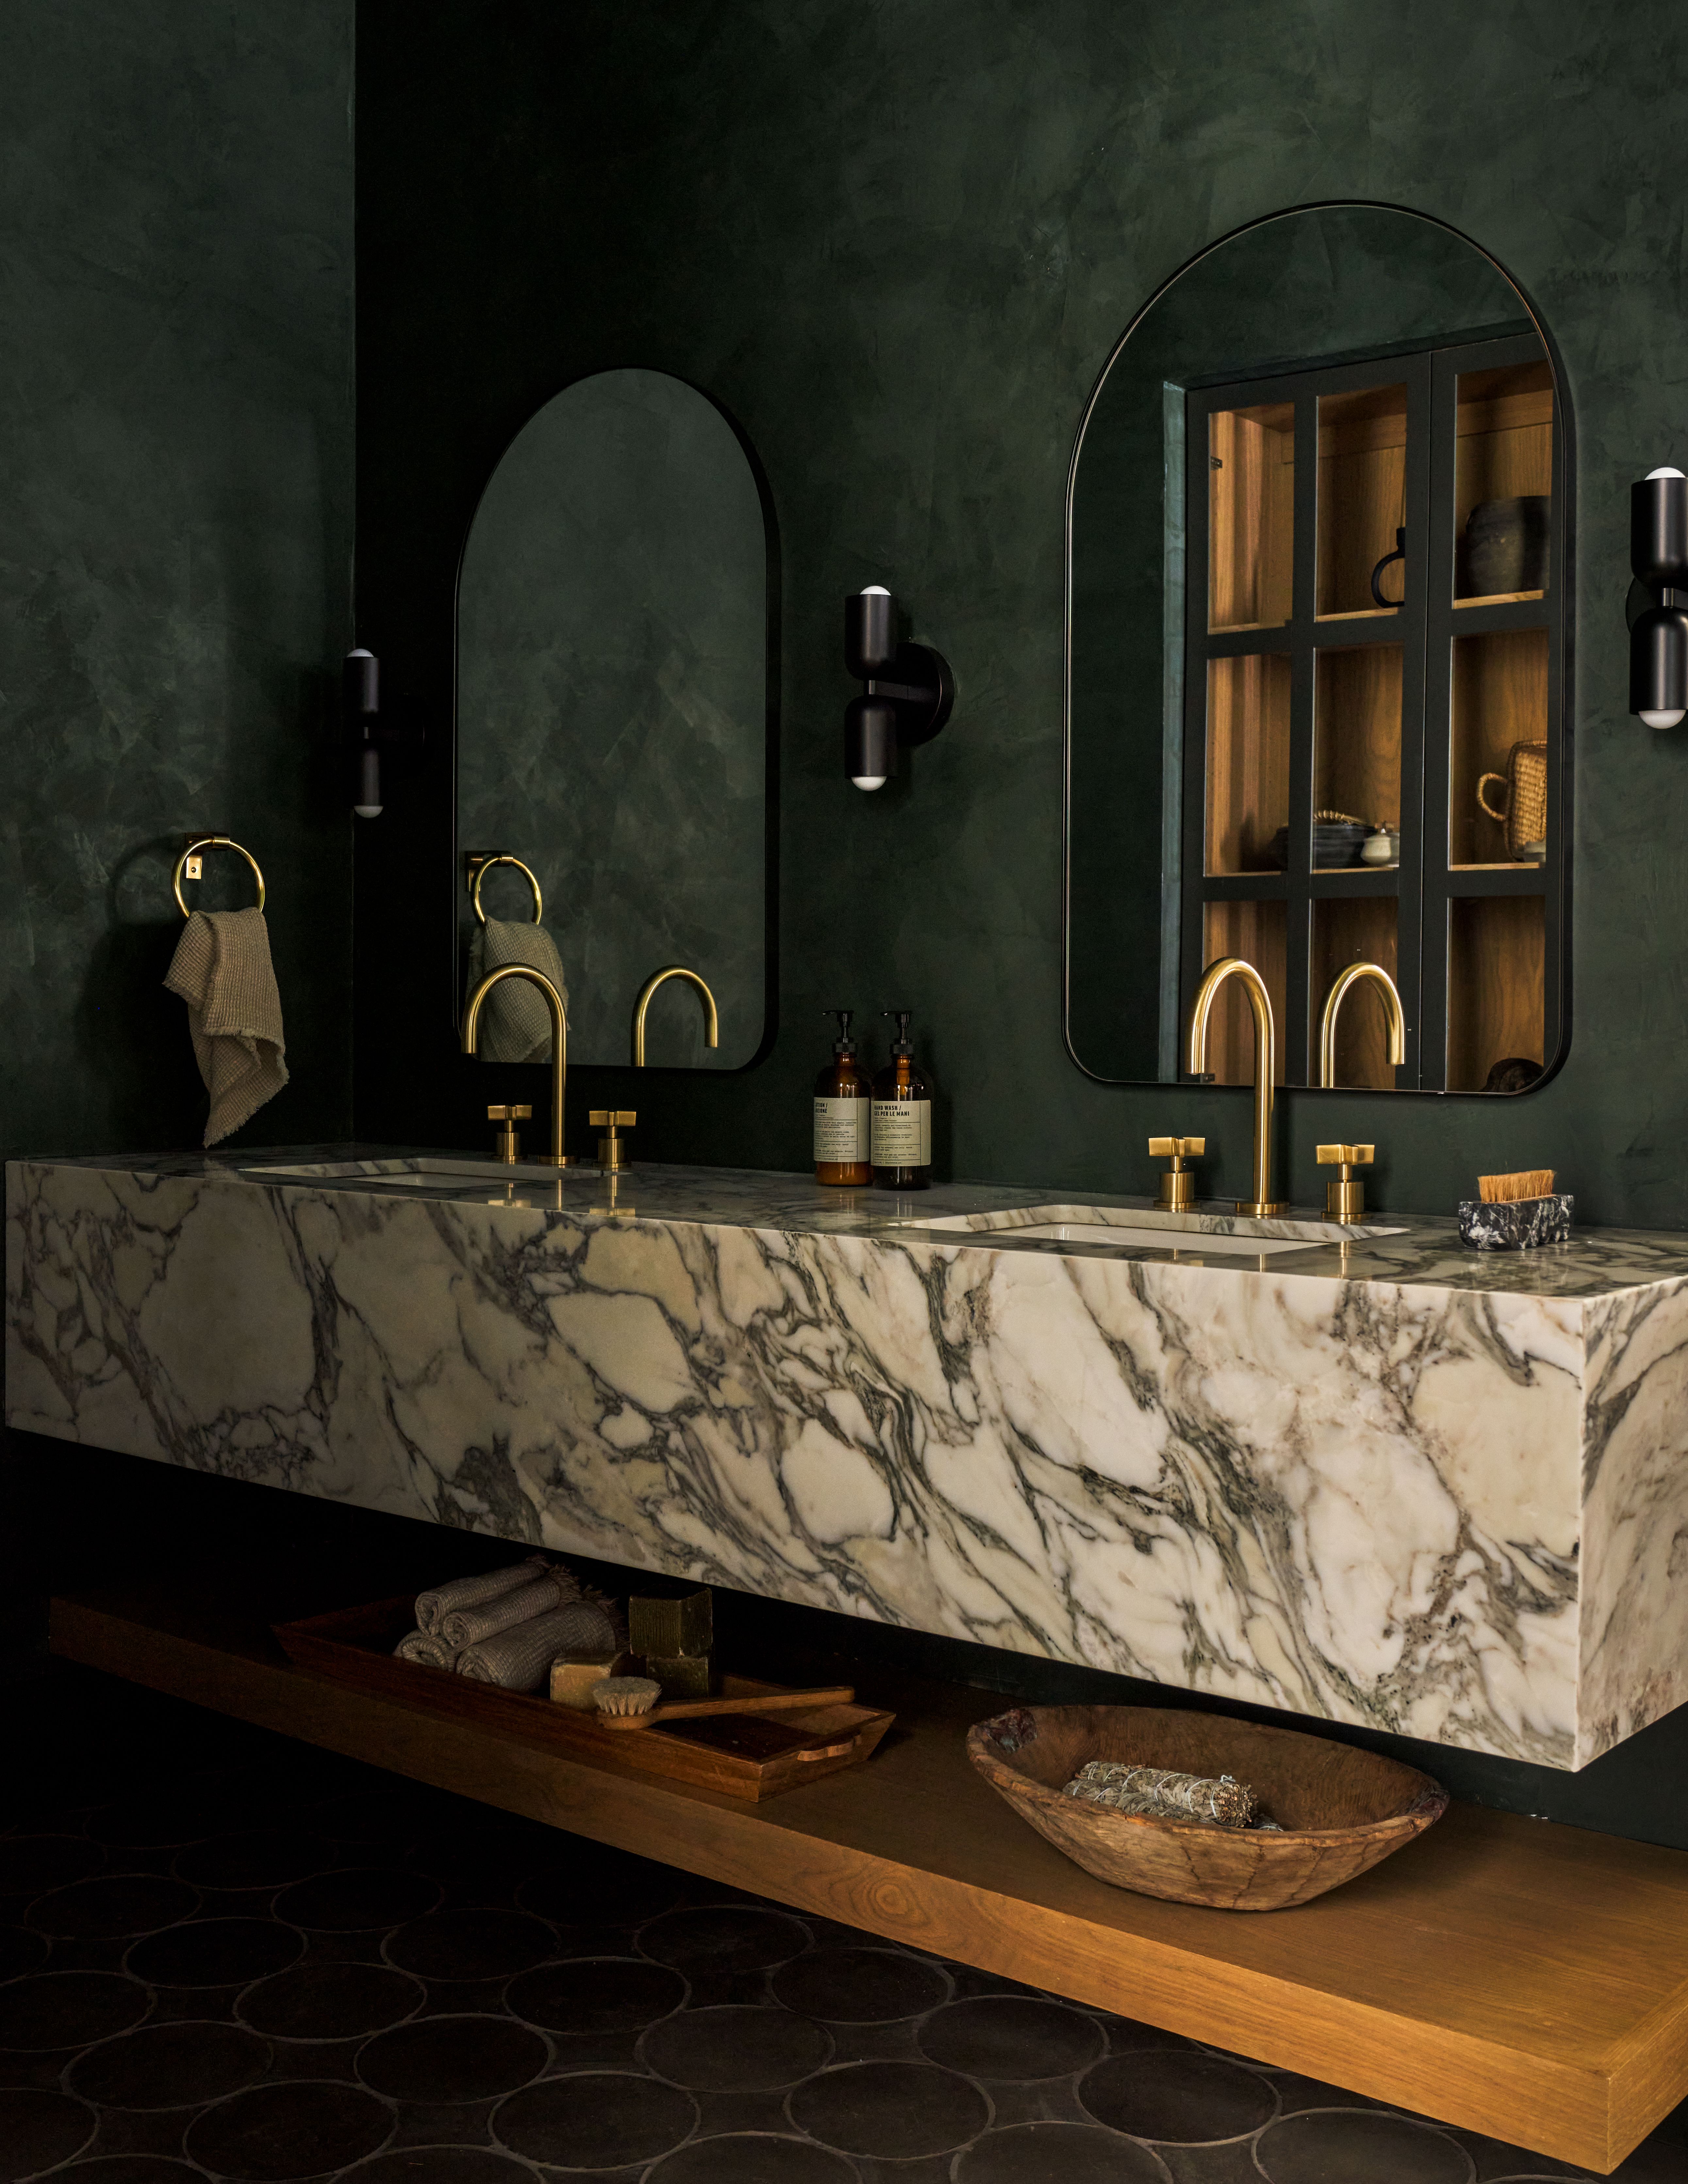 A bathroom painted in a deep forest green shade with a double marble vanity